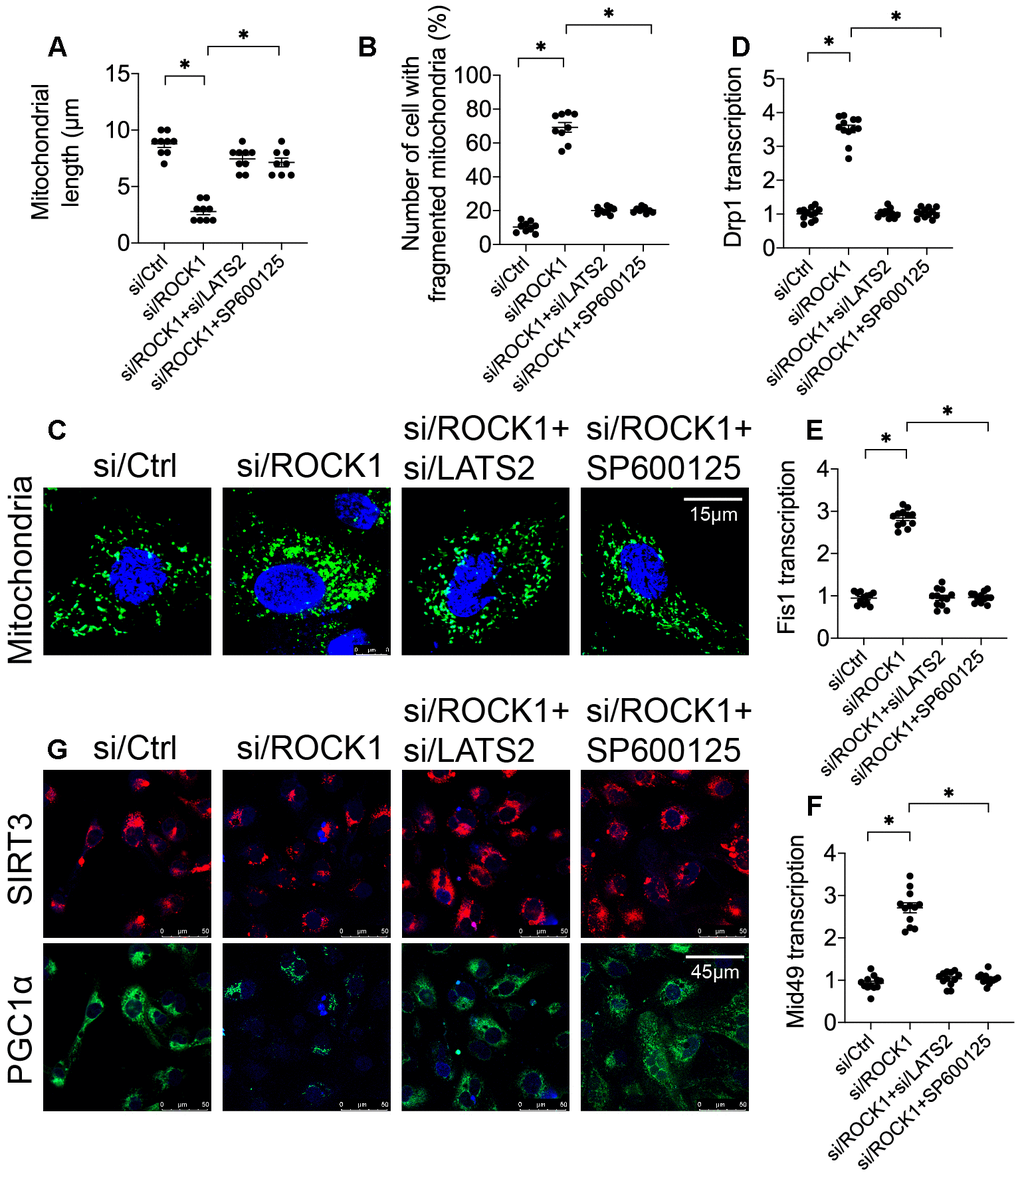 The ROCK1-LATS2-JNK pathway affects mitochondrial dynamics and mitochondrial biogenesis in A549 cells. (A–C) Immunofluorescence was used to observe mitochondrial morphology in A549 cells. siRNA against LATS2 (si/LATS2) and SP600125 were used inhibit LATS2 upregulation and JNK activation, respectively. Mitochondrial length and number of cells with fragmented mitochondria were recorded. (D–F) A qPCR assay was used to analyze Drp1, Fis1, and Mid49 transcription in A549 cells in response to ROCK1 knockdown, LATS2 knockdown, and JNK inhibition. (G) Double immunofluorescence was used to observe alterations in Sirt3 and PGC1α levels; relative immunofluorescence intensities were evaluated. *p